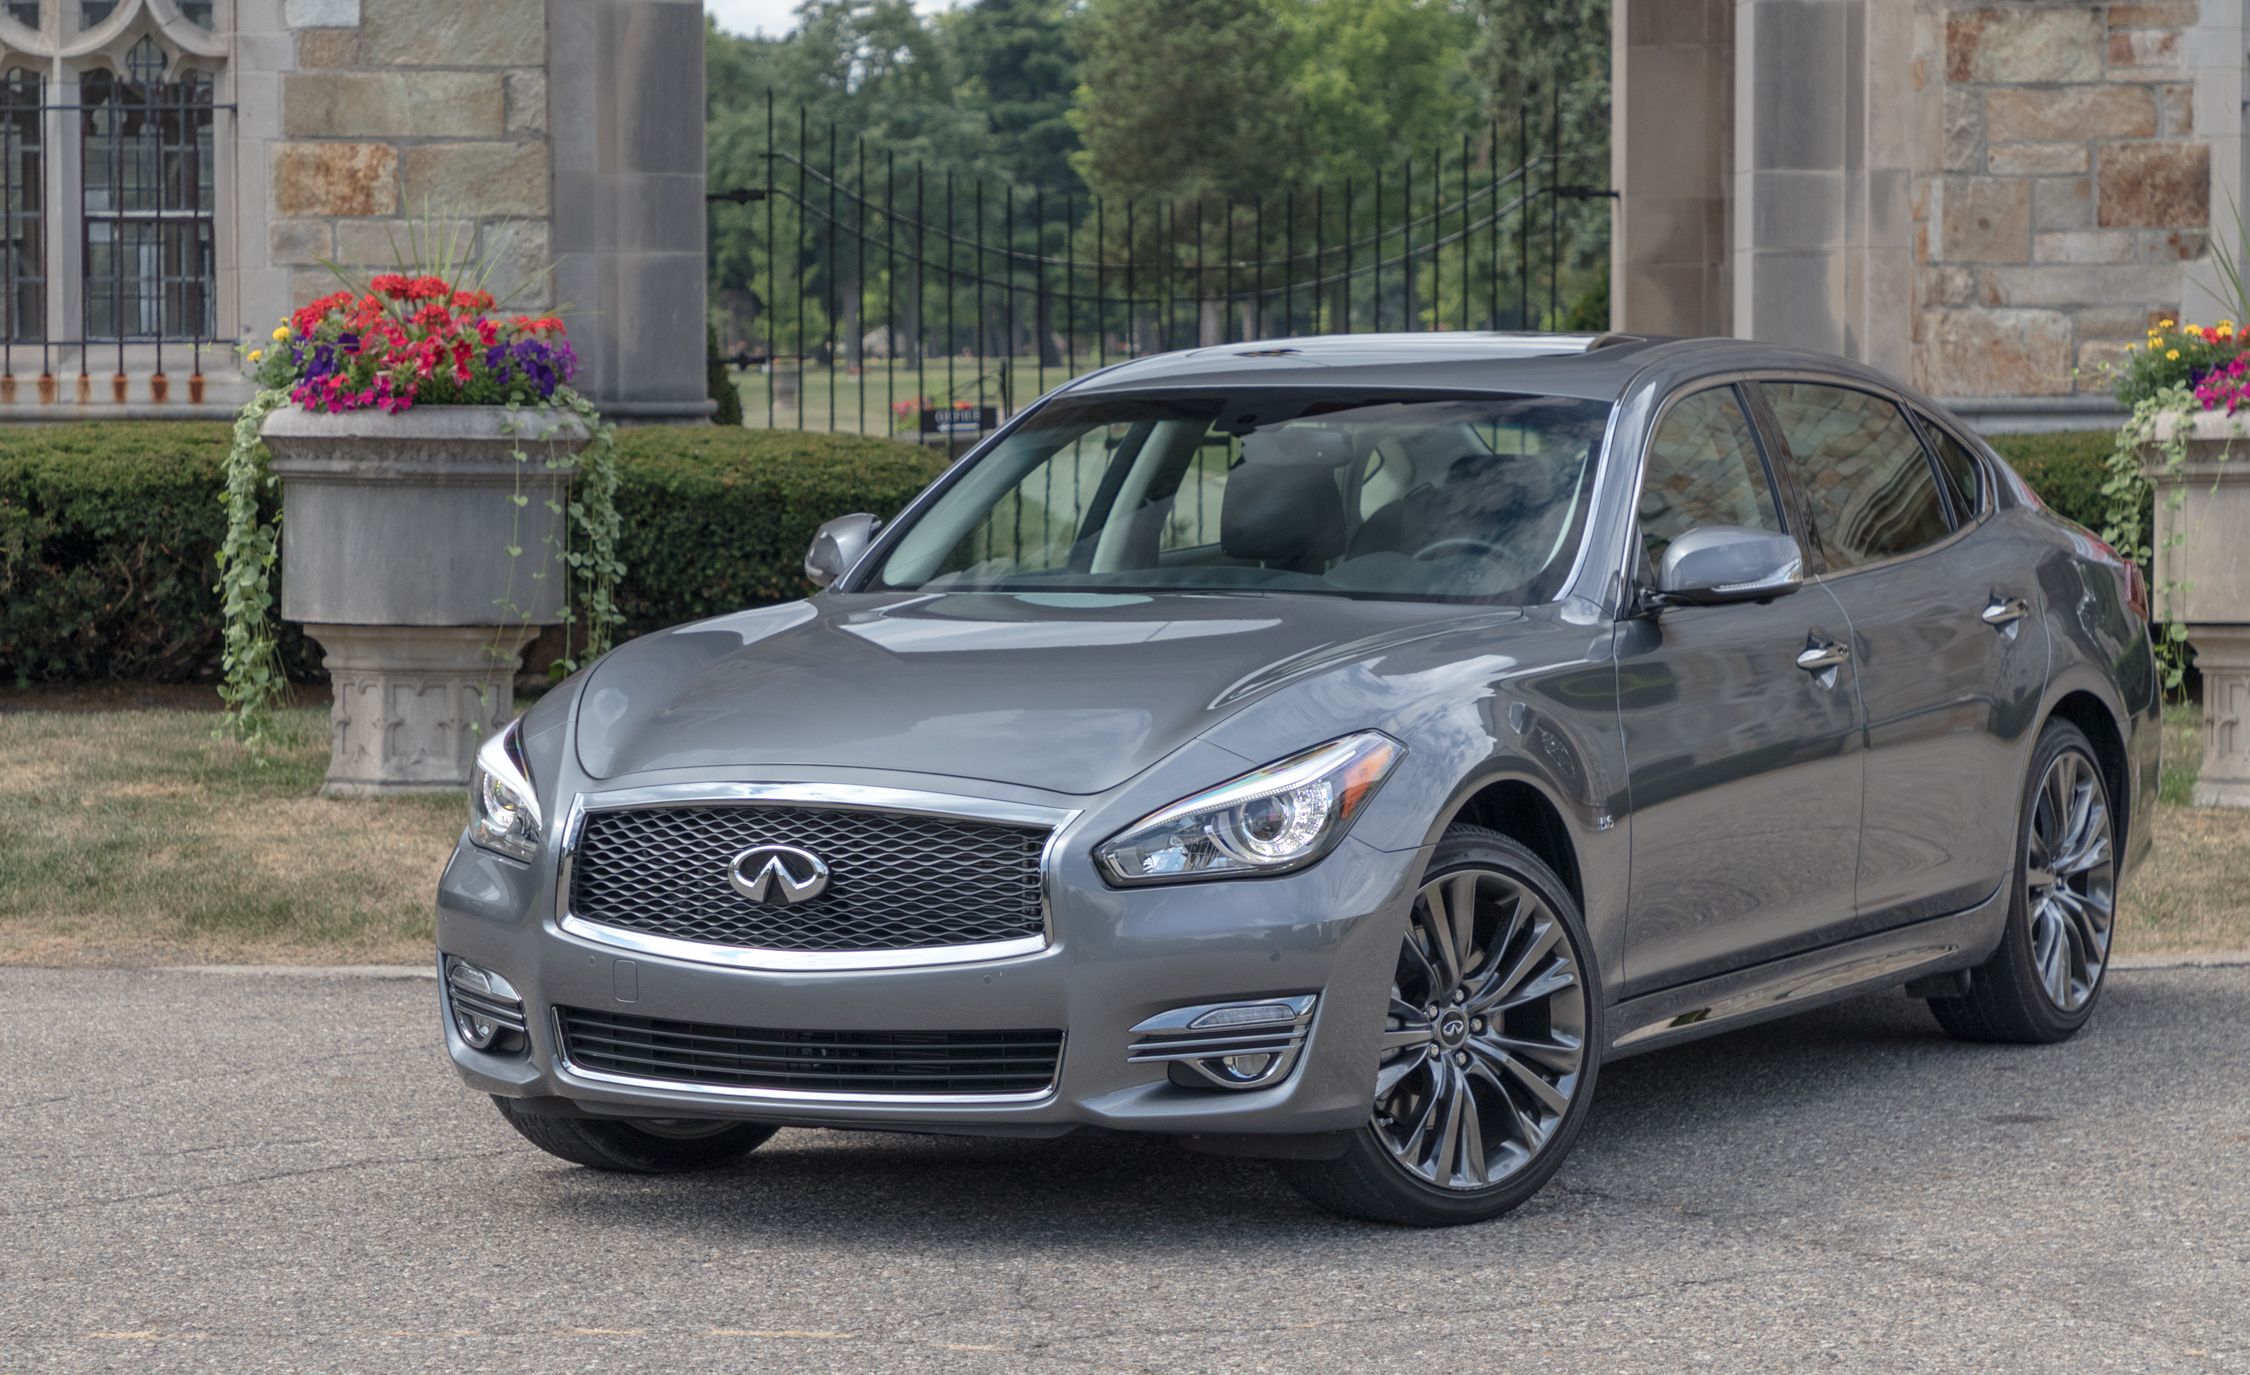 2017 Infiniti Q70 Review, Pricing, and Specs